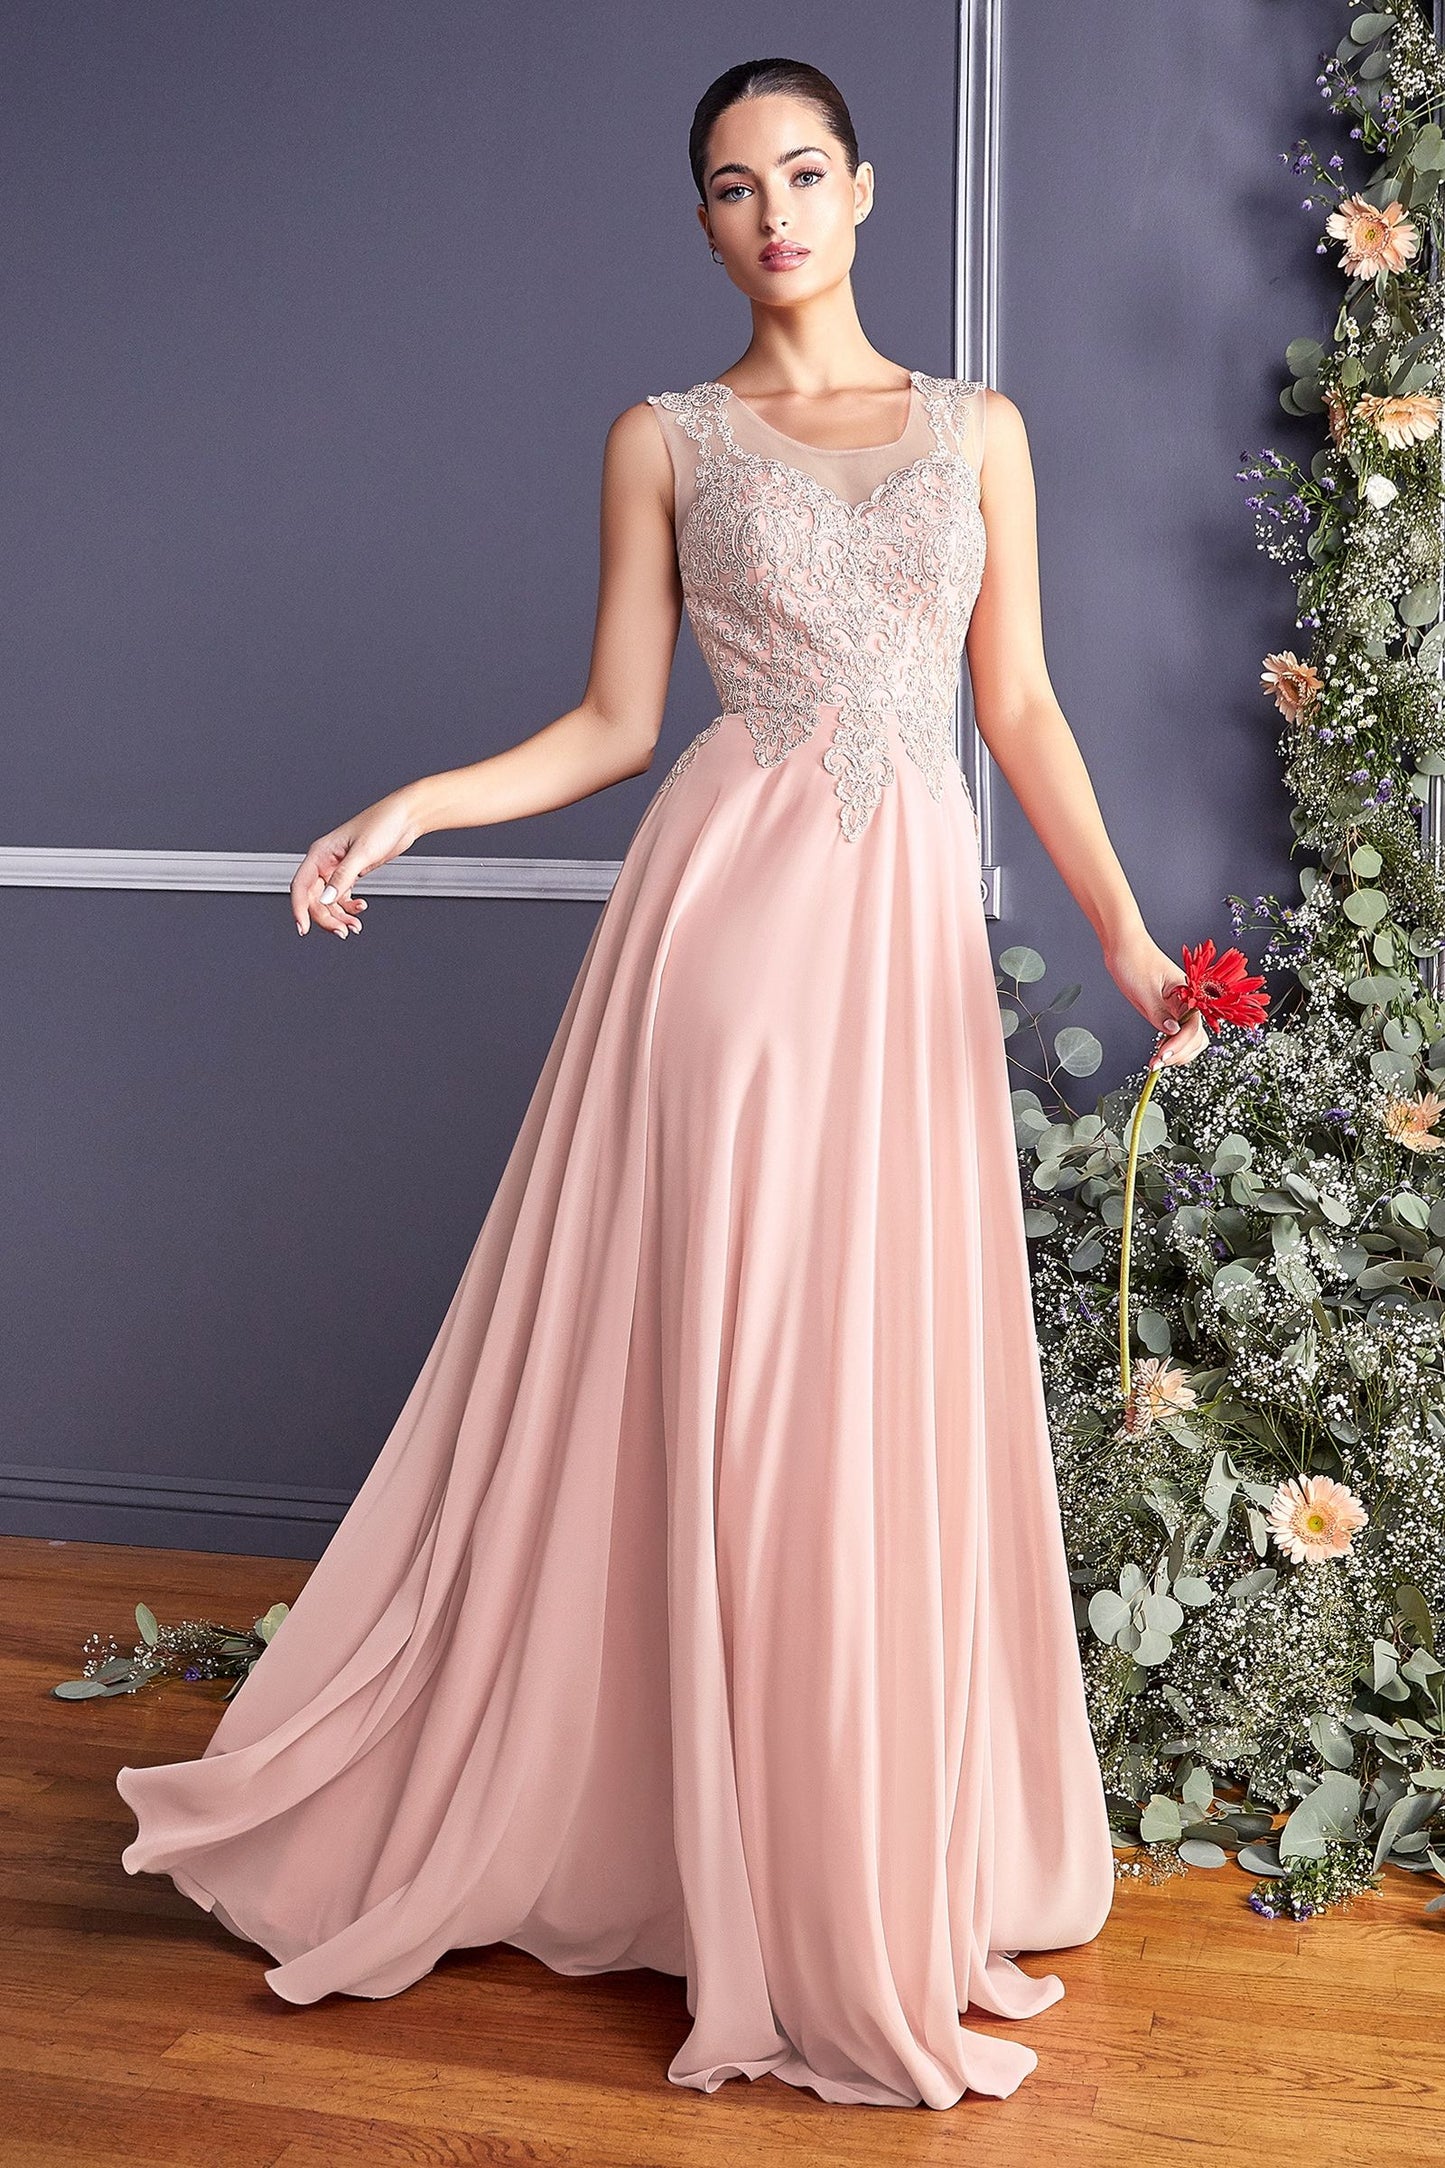 A-Line Chiffon Gown With Lace Embellished Bodice.